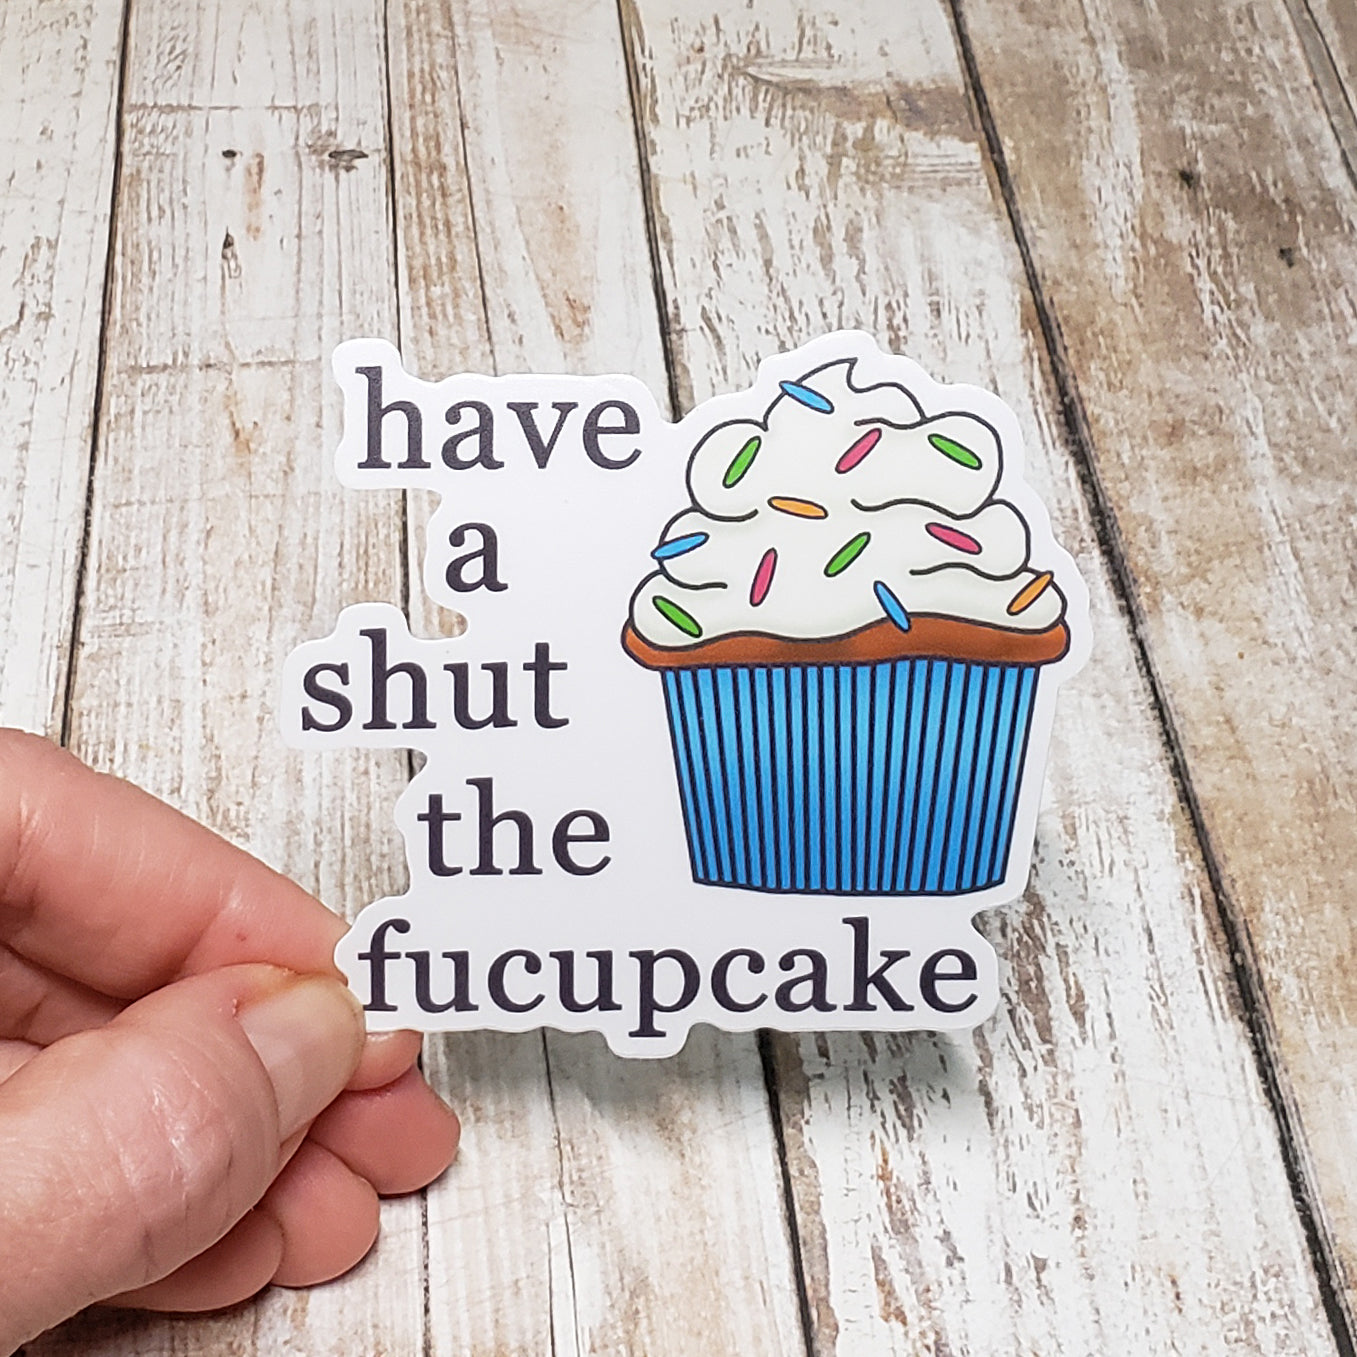 Vinyl Sticker with illustrated cupcake with white icing and rainbow sprinkles on white background with the text, "Have A Shut The Fucupcake" in dark grey.